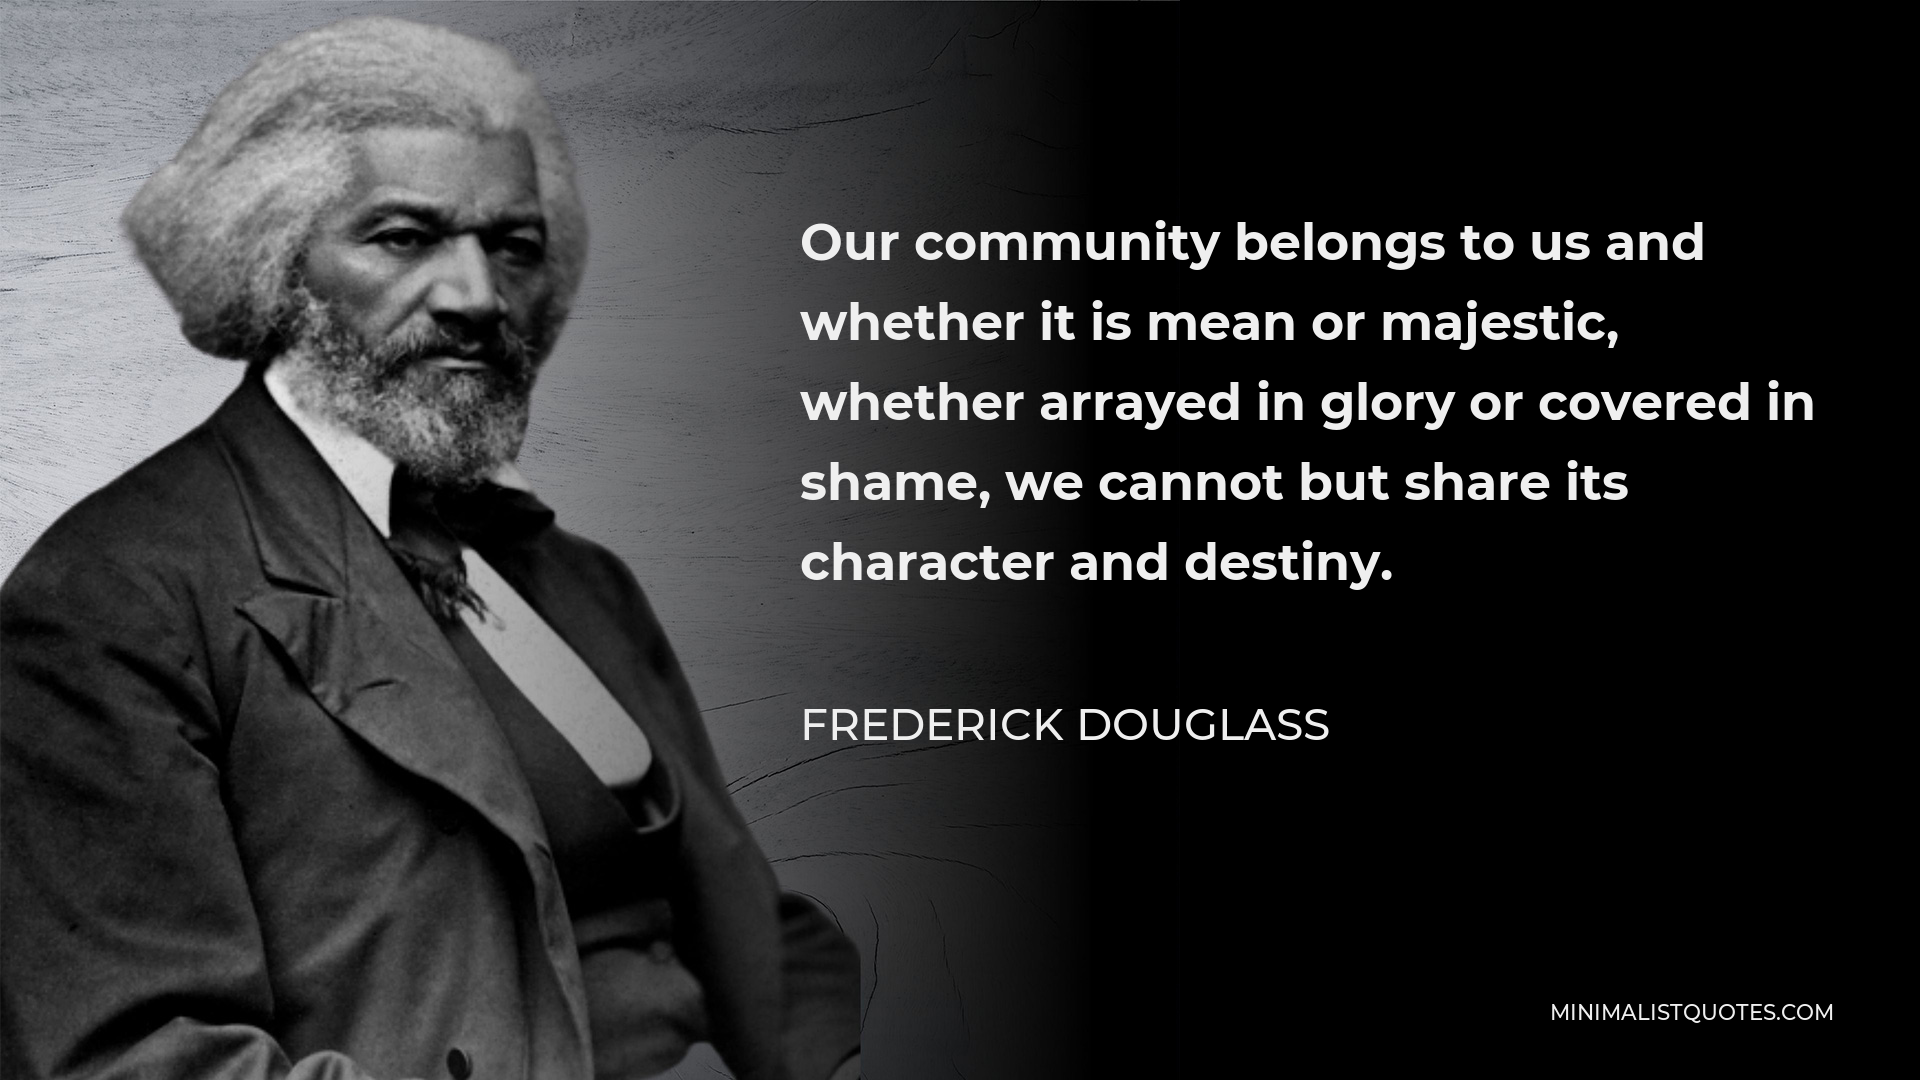 Frederick Douglass Quote - Our community belongs to us and whether it is mean or majestic, whether arrayed in glory or covered in shame, we cannot but share its character and destiny.